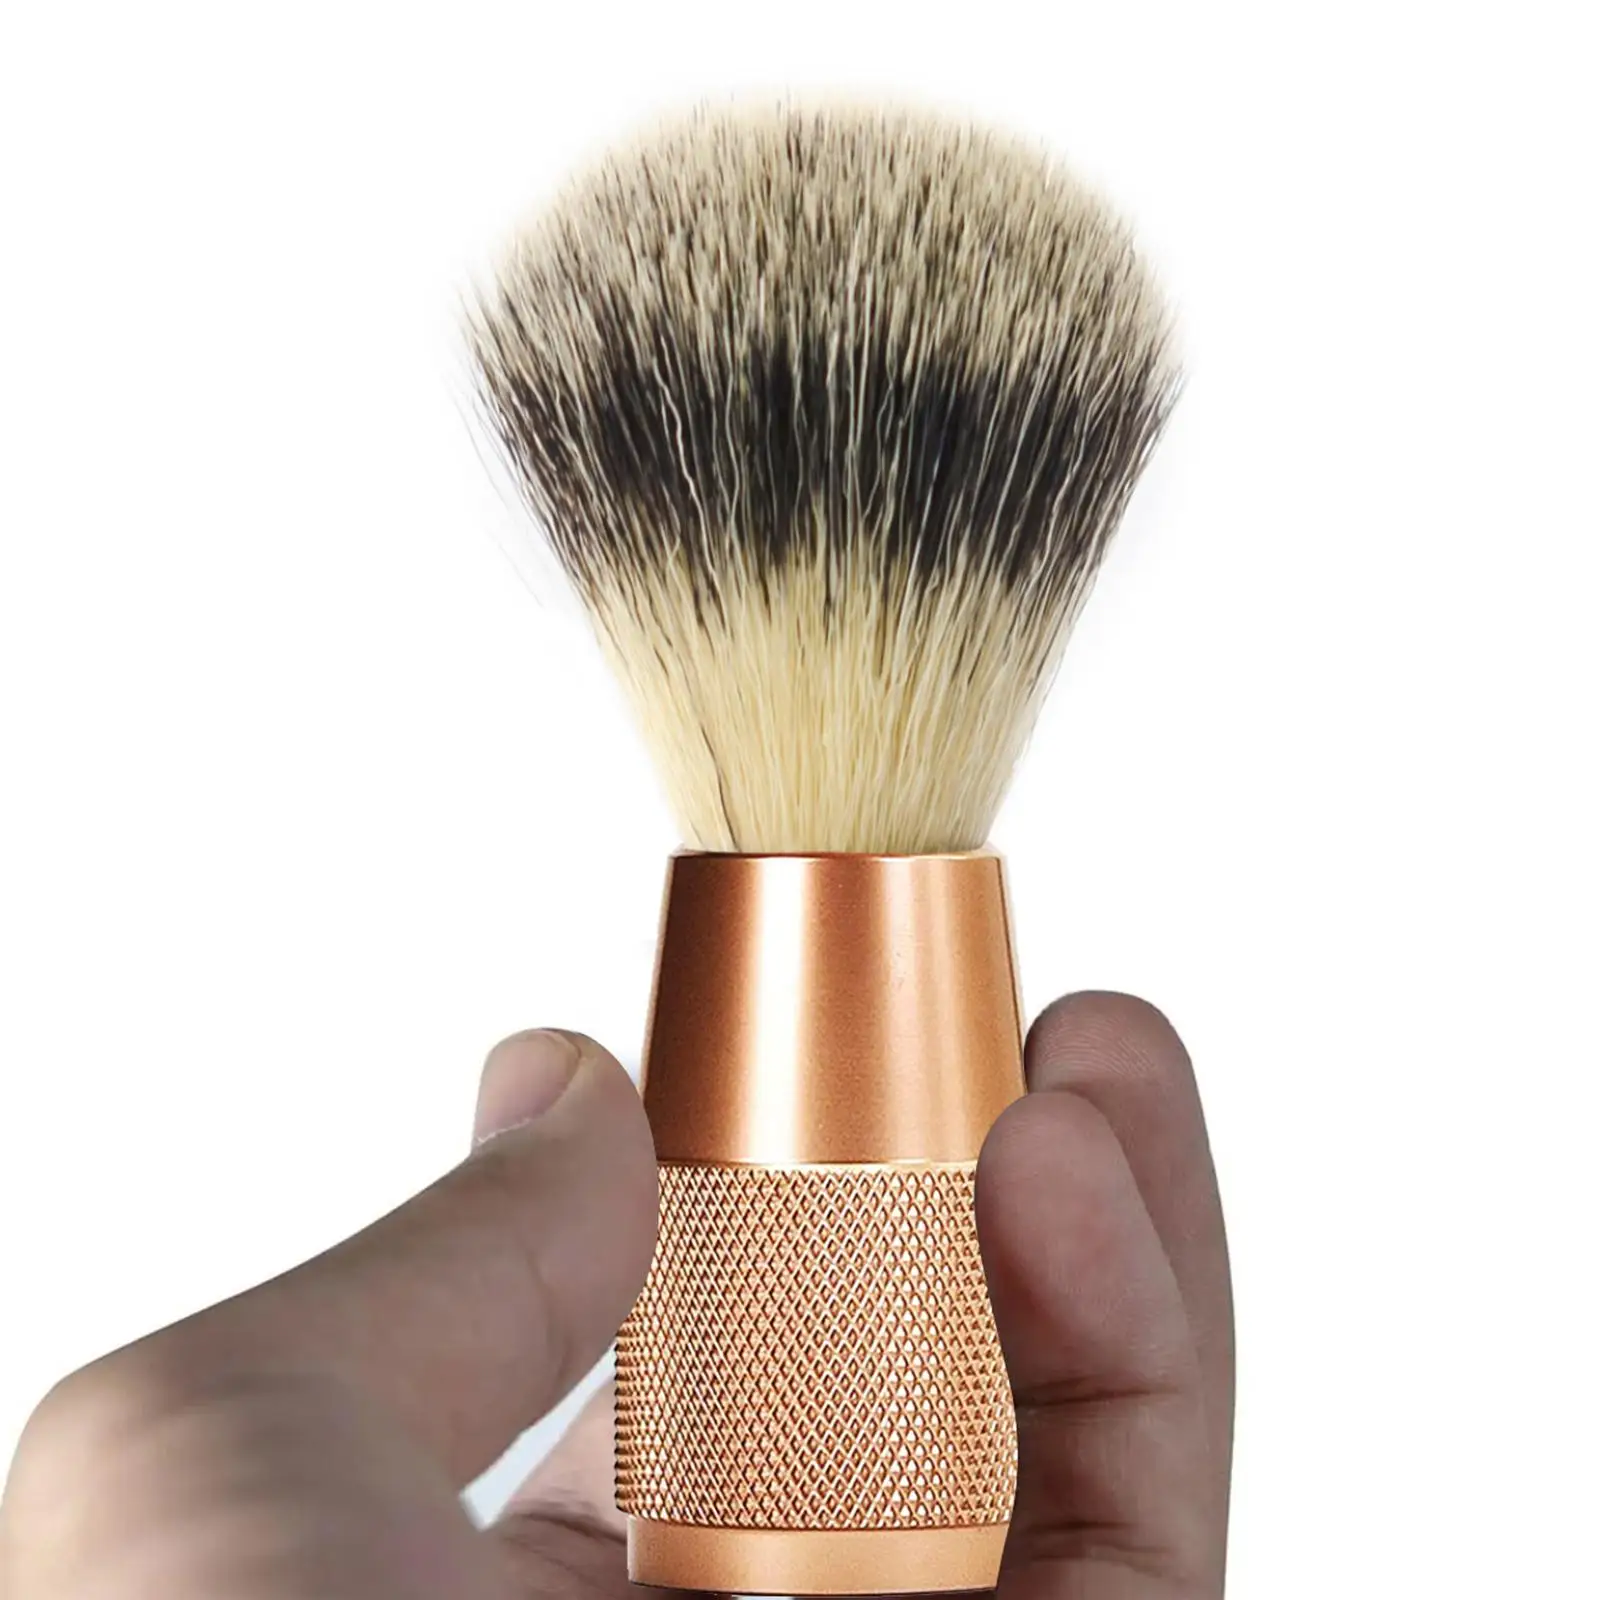 Man Shaving Brush Shaving Accessory Birthday Gift Durable Handled Length 4.3inch Professional Comfortable Face Hair Cleaning